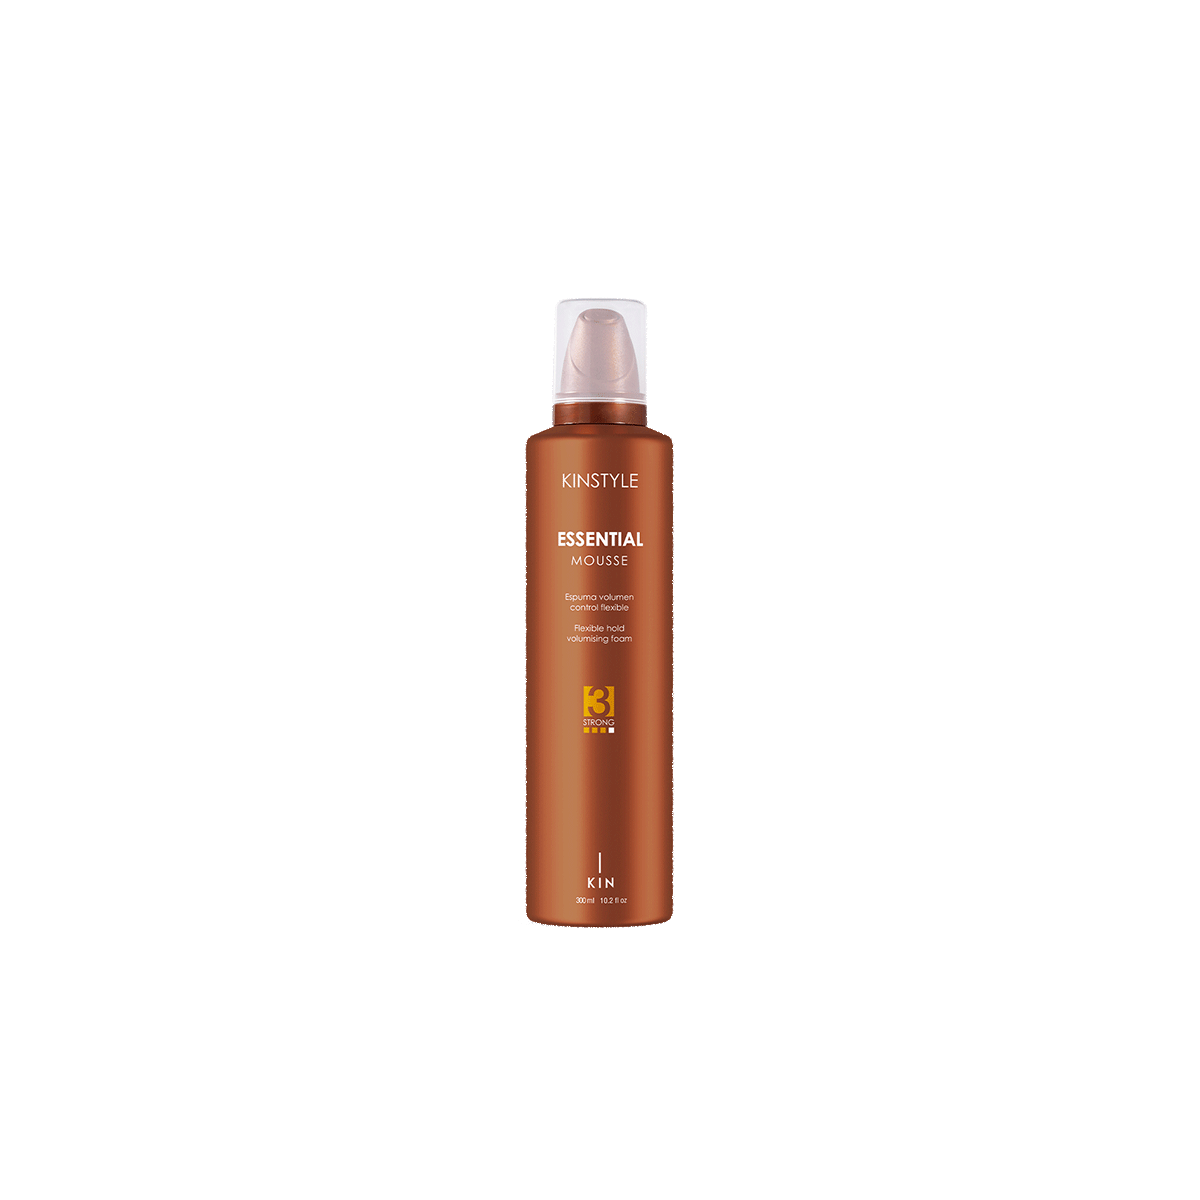 Kinstyle Essential Mousse